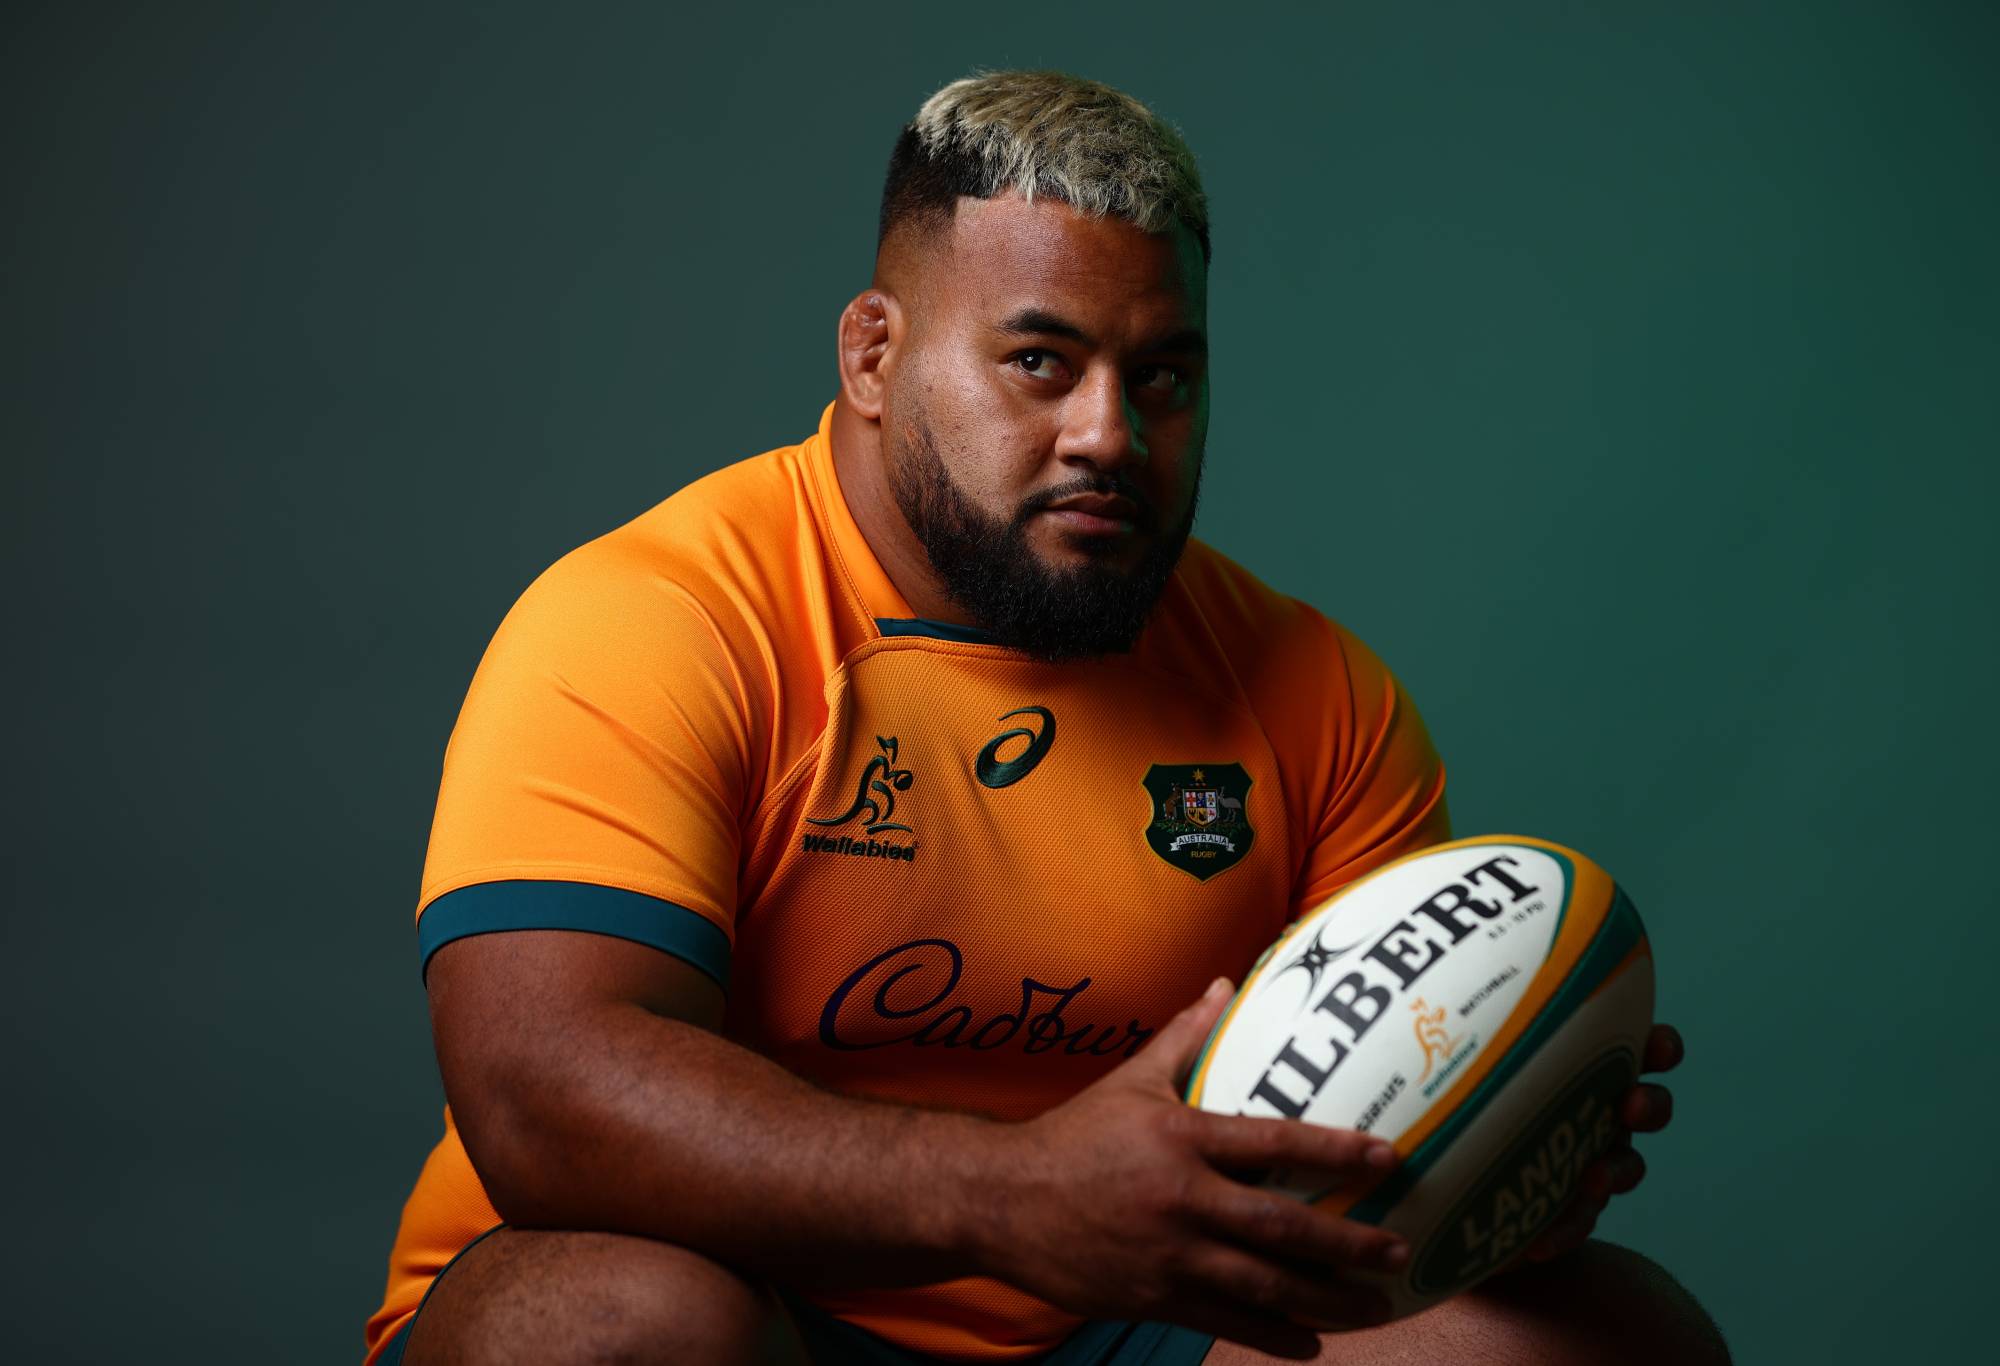 Taniela Tupou poses during the Australian Wallabies 2022 Team Headshots session on June 24, 2022 in Sunshine Coast, Australia. (Photo by Chris Hyde/Getty Images for Rugby Australia)